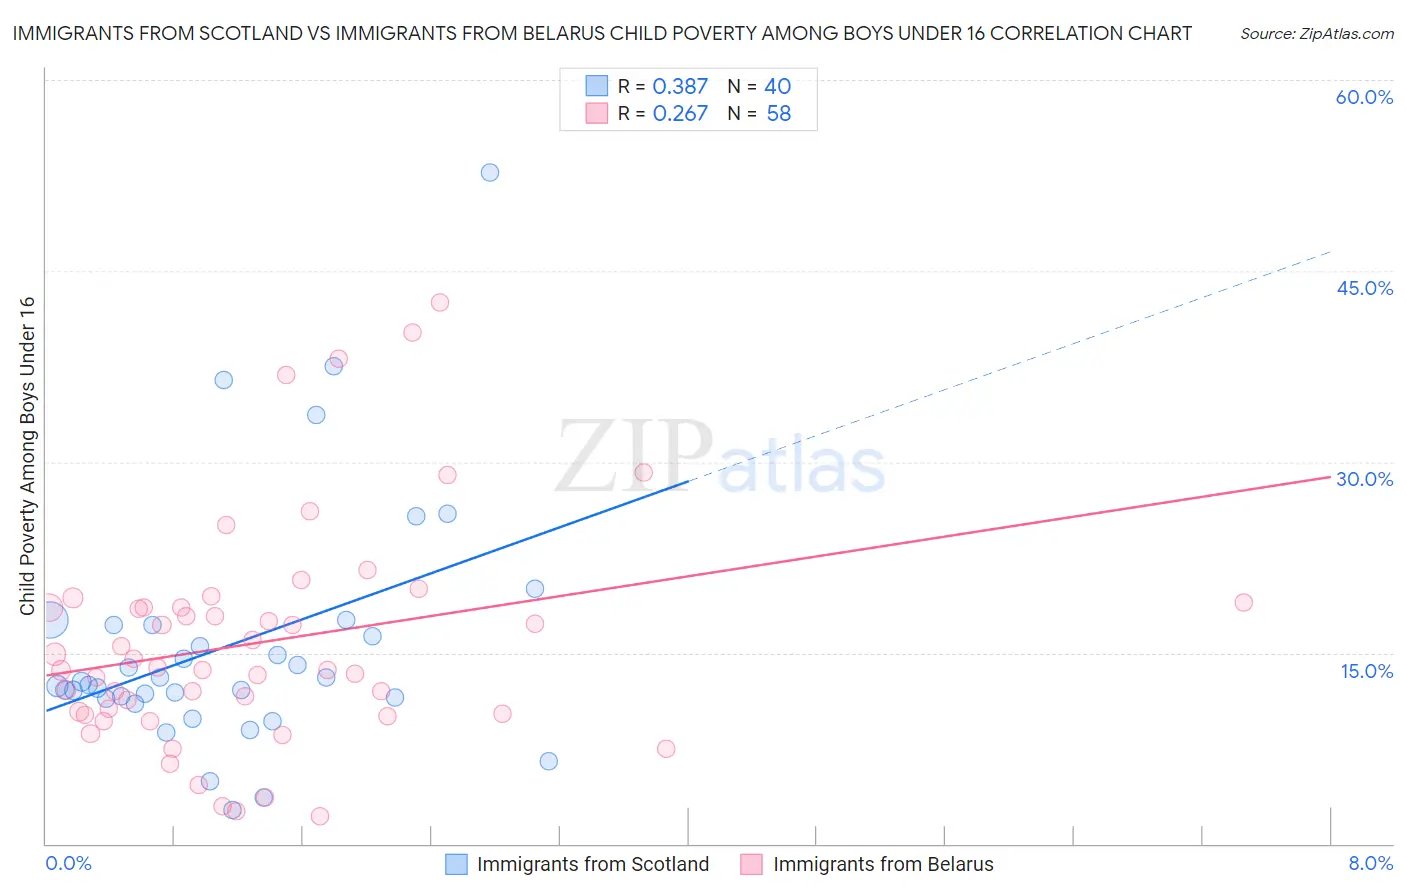 Immigrants from Scotland vs Immigrants from Belarus Child Poverty Among Boys Under 16